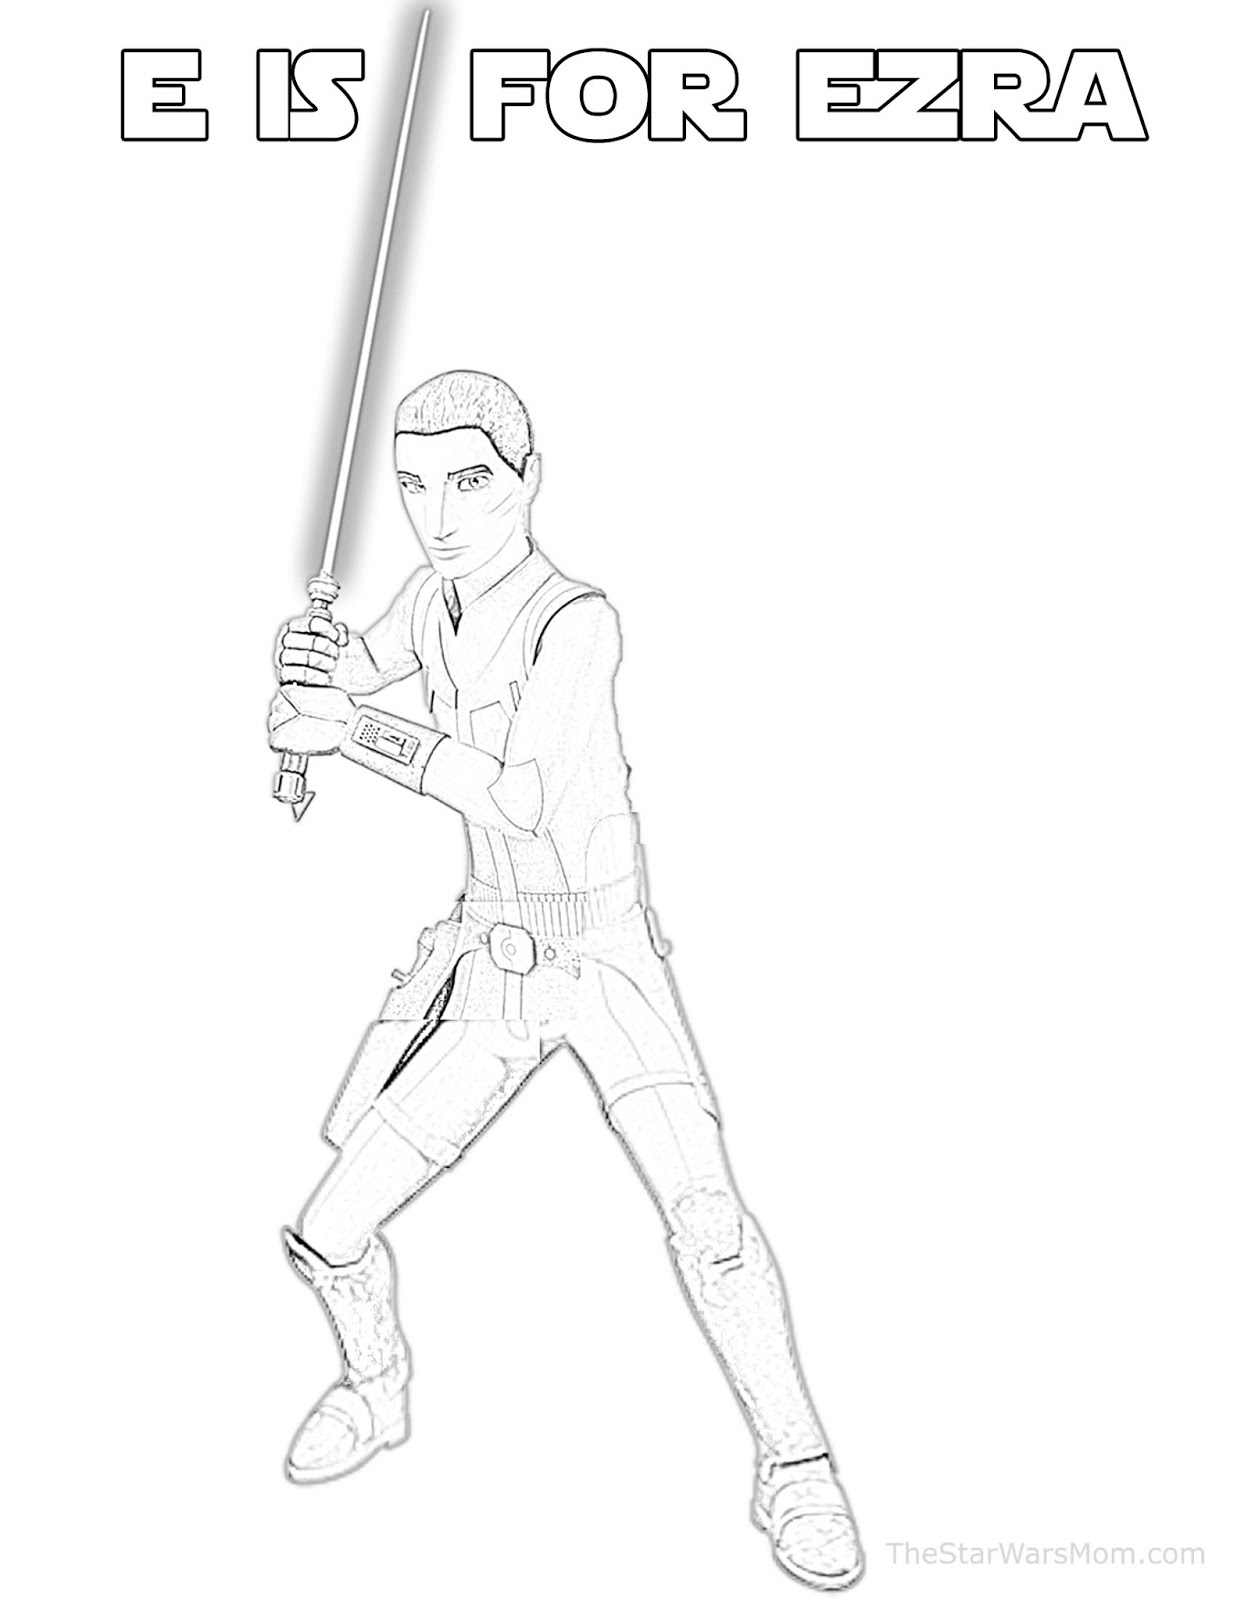 E is for Ezra Bridger - Star Wars Alphabet Coloring Page - The ...